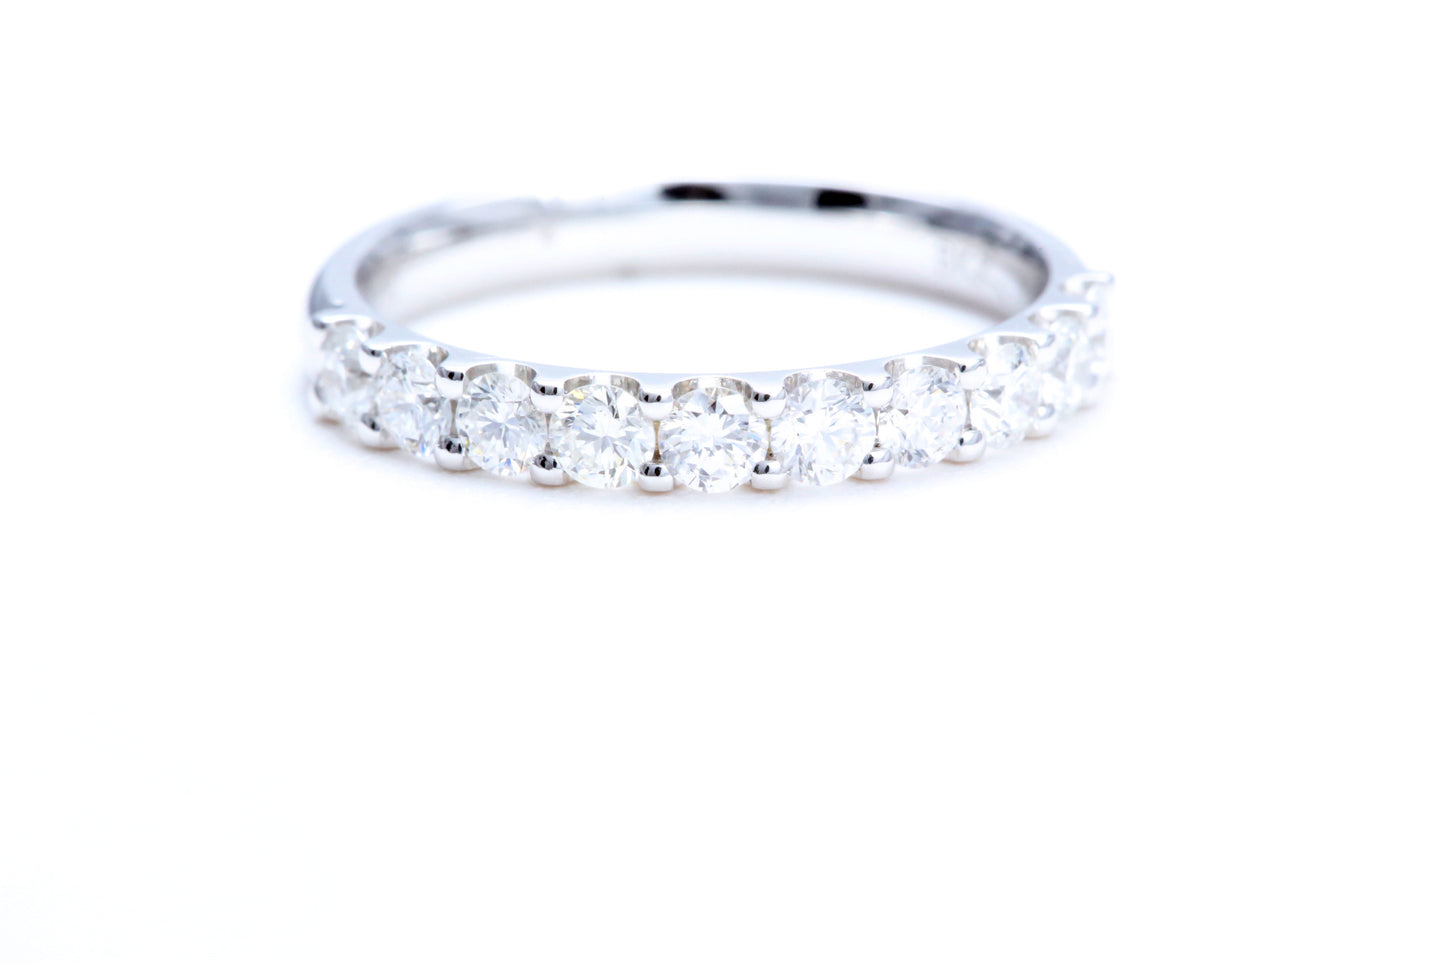 Minimalist Pavé Diamond Ring 3/4 of a carat total weight in 14K white gold